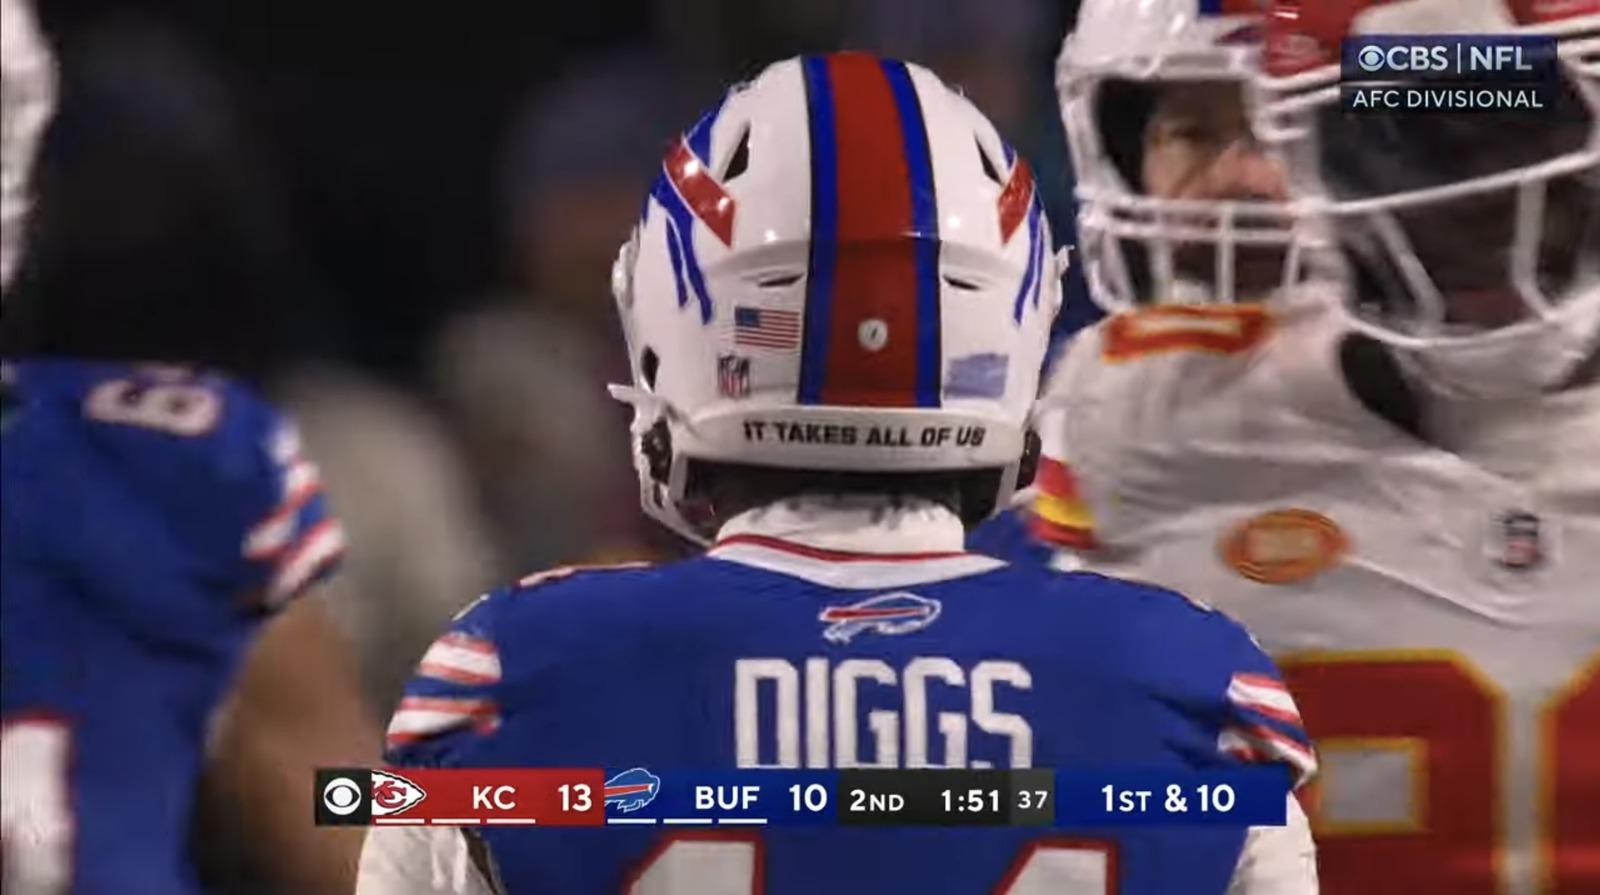 Stefon Diggs during Sunday’s battle between the Bills and Chiefs